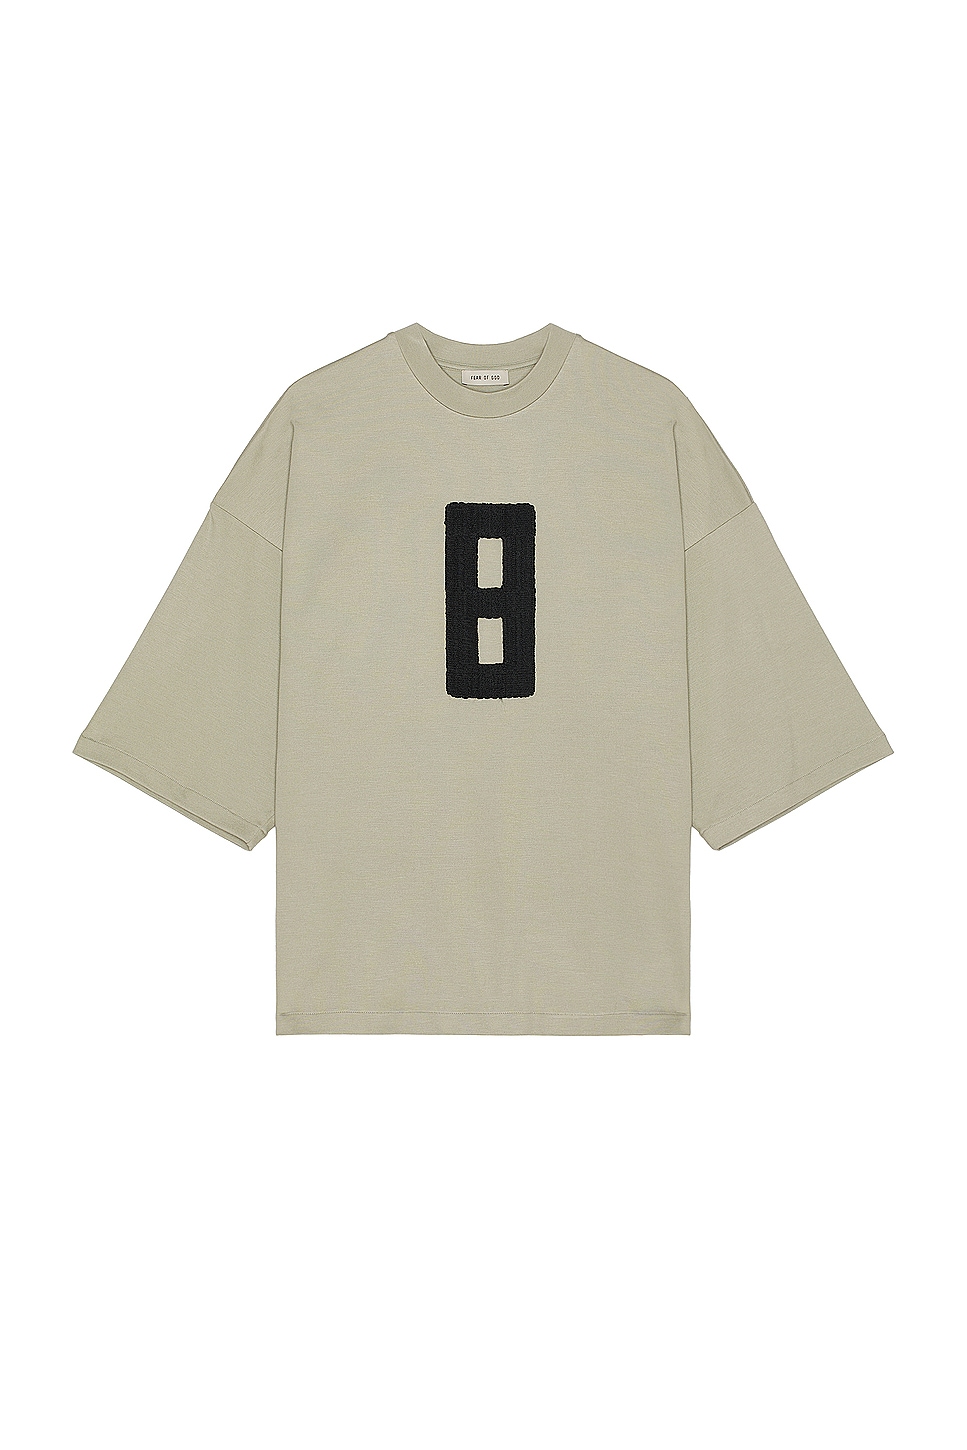 Image 1 of Fear of God Embroidered 8 Milano Tee in Paris Sky